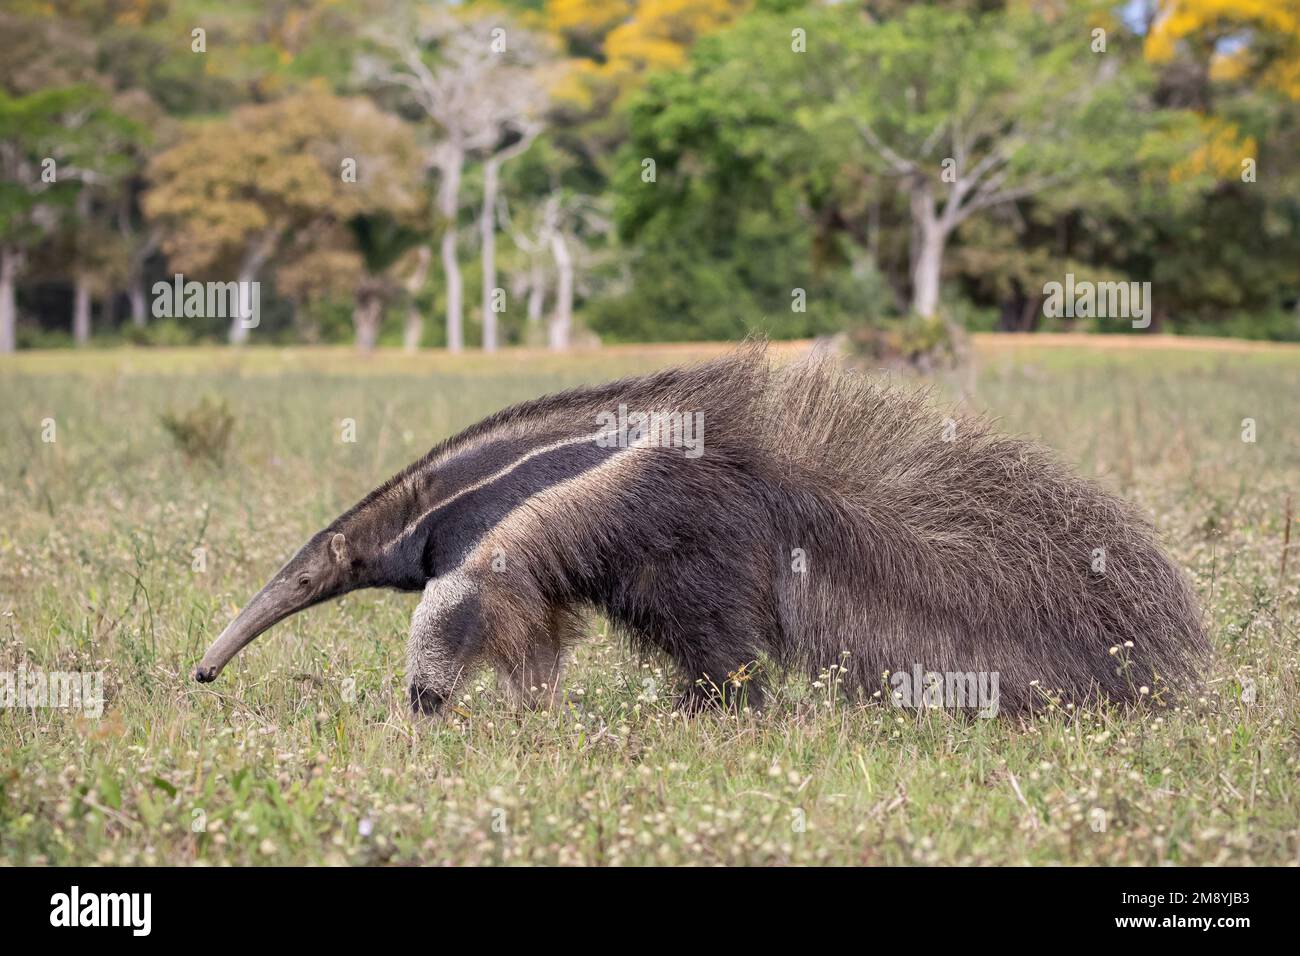 A giant anteater (Myrmecophaga tridactyla) foraging through the grasslands of the Pantanal in Brazil during dry season. Stock Photo